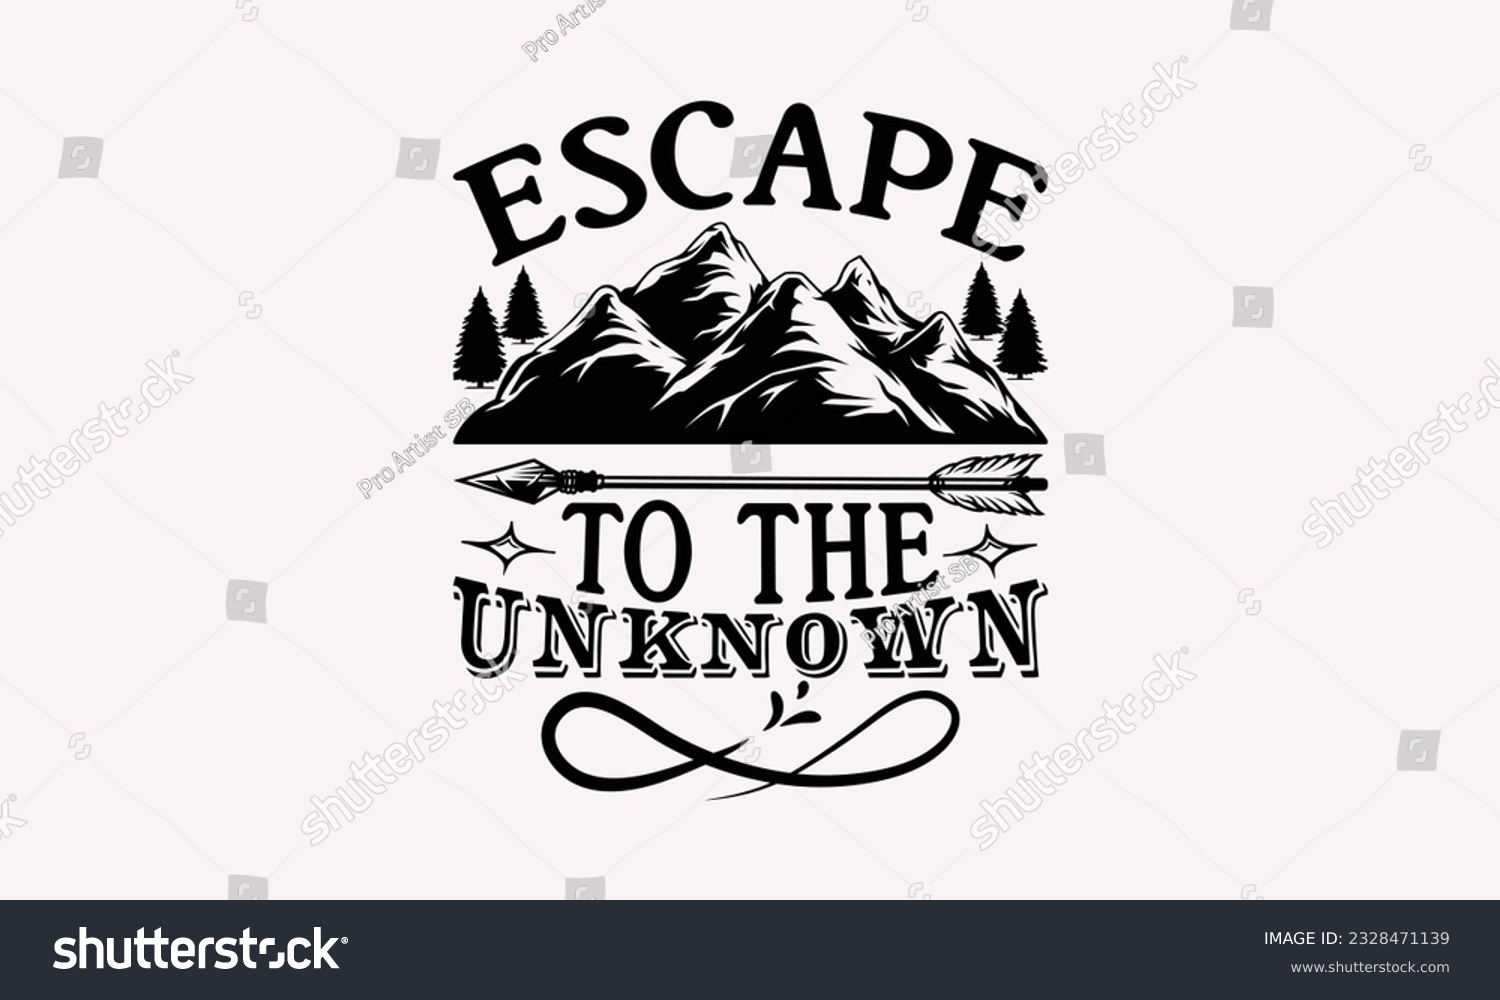 SVG of Escape to the unknown - Camping SVG Design, Campfire T-shirt Design, Sign Making, Card Making, Scrapbooking, Vinyl Decals and Many More. svg